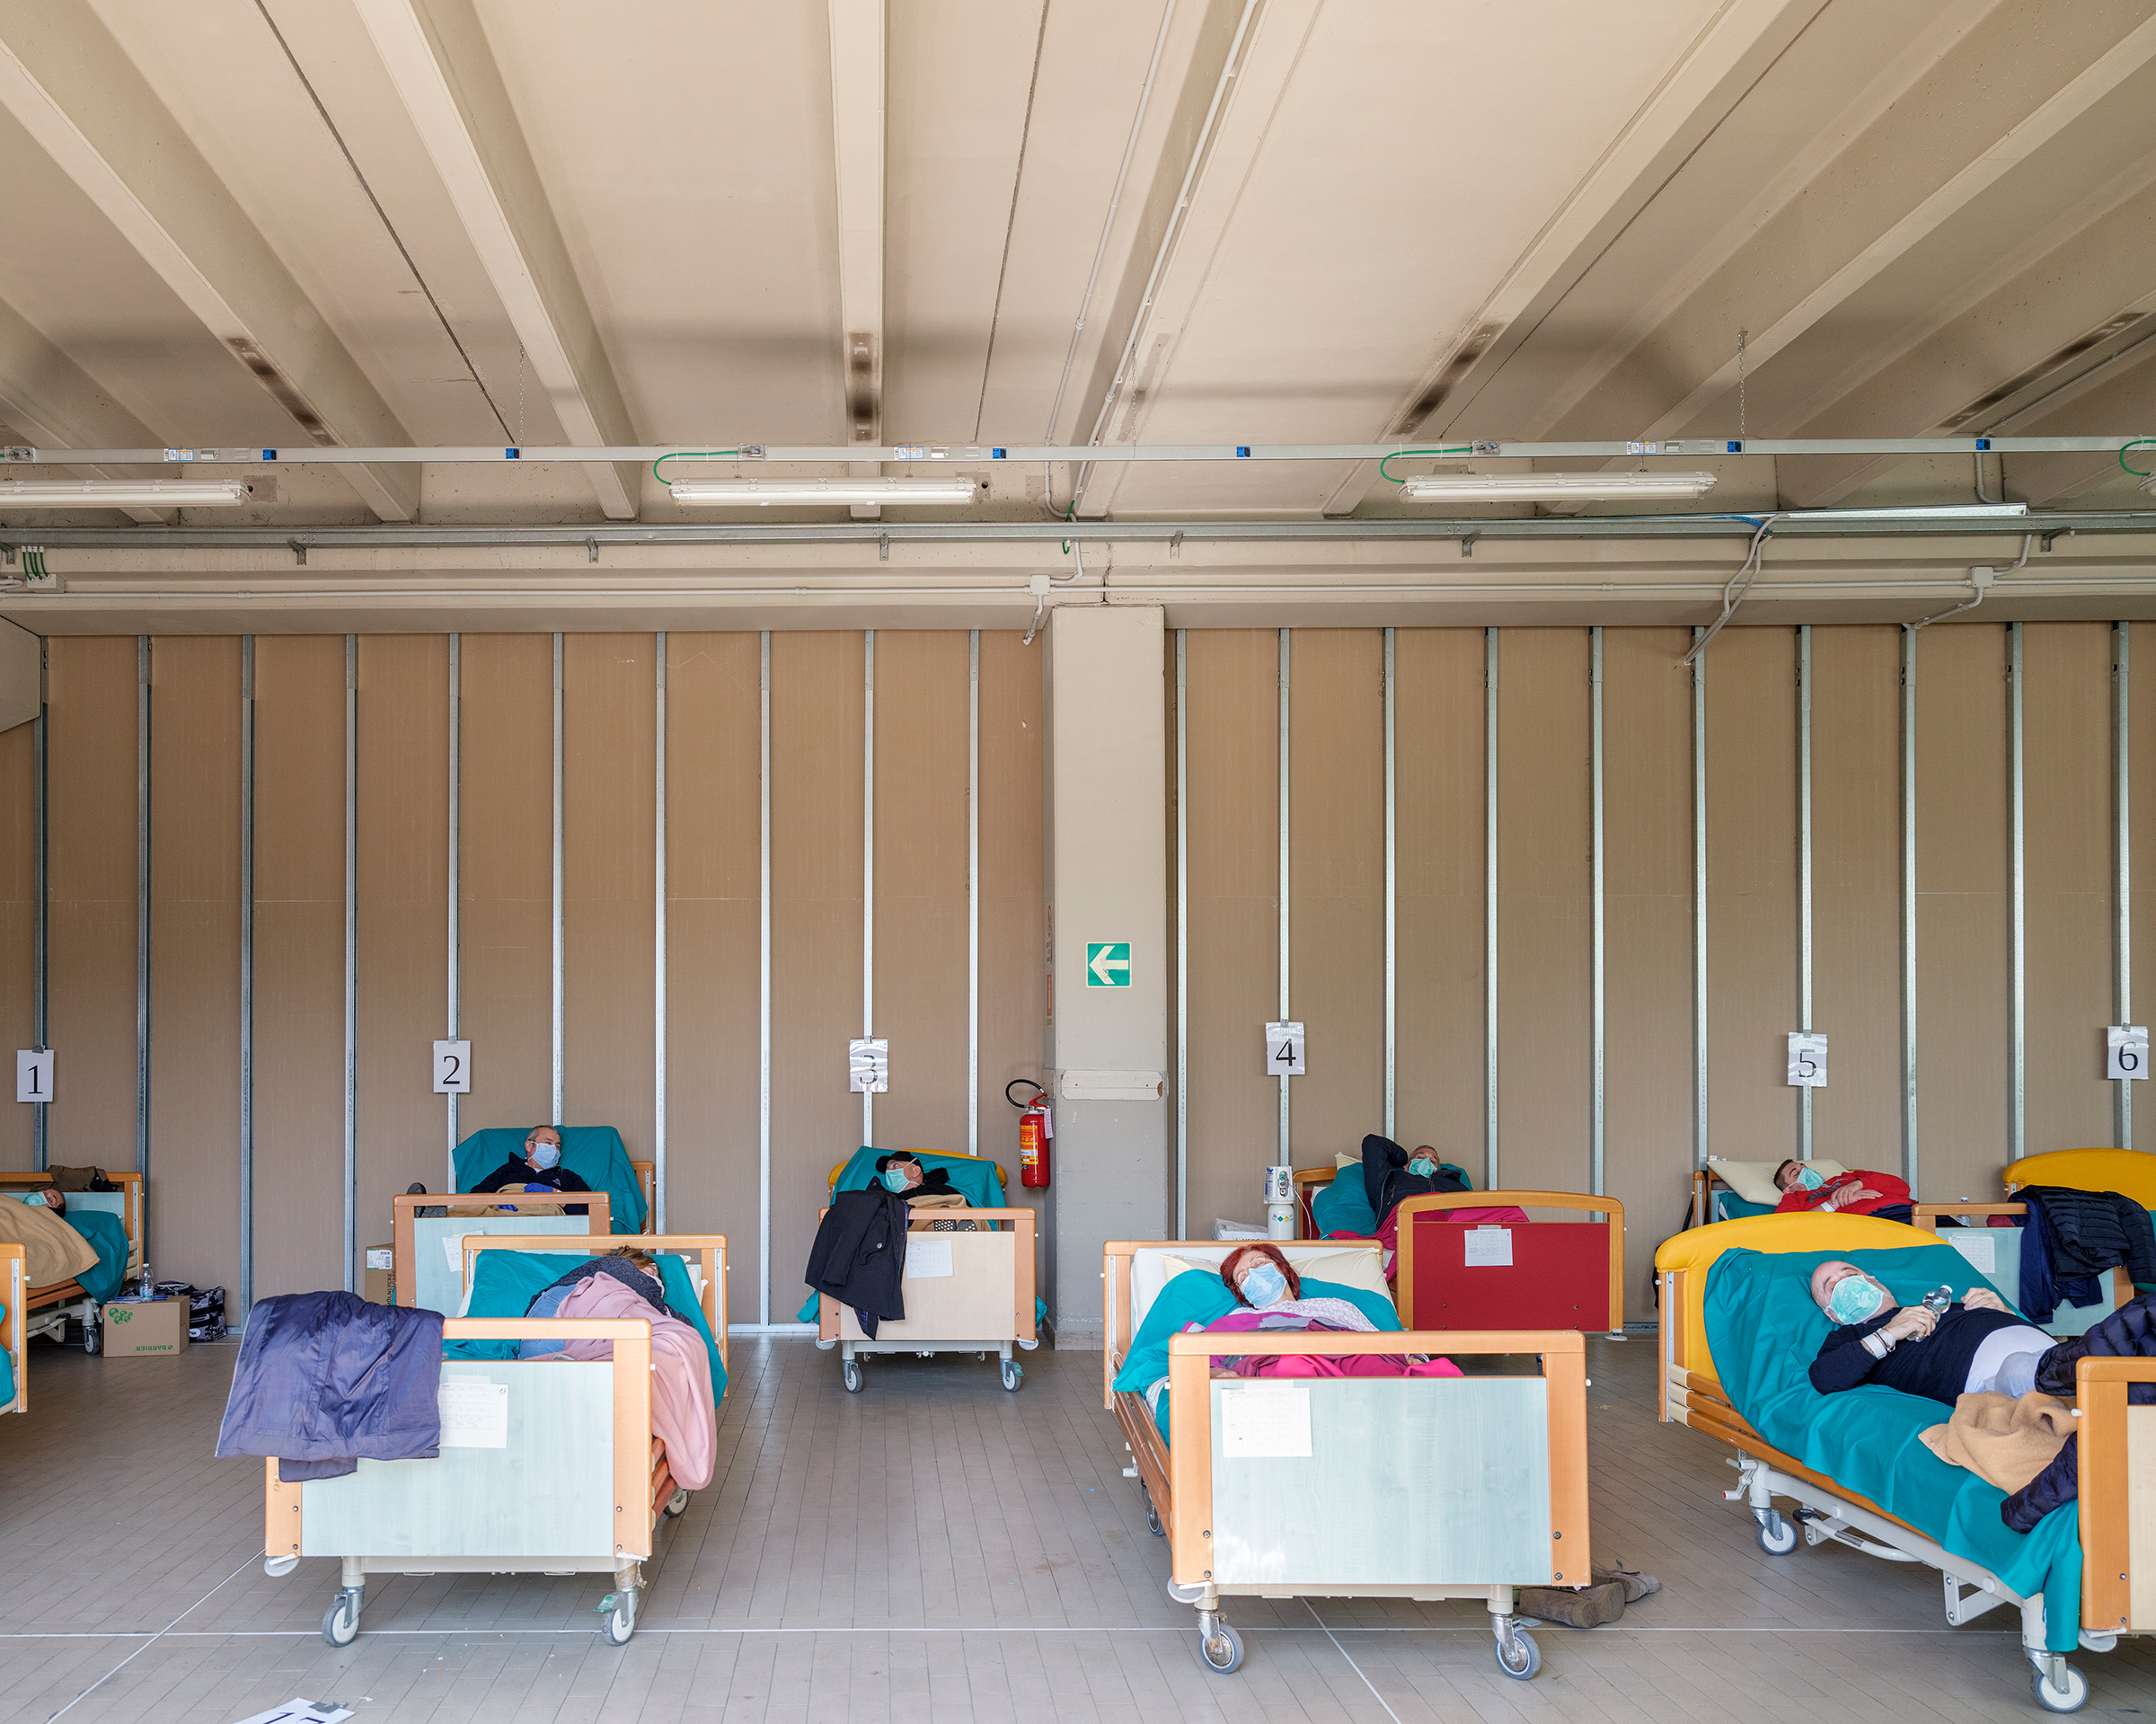 Beds in a COVID-19 unit are filled at a hospital in Brescia.